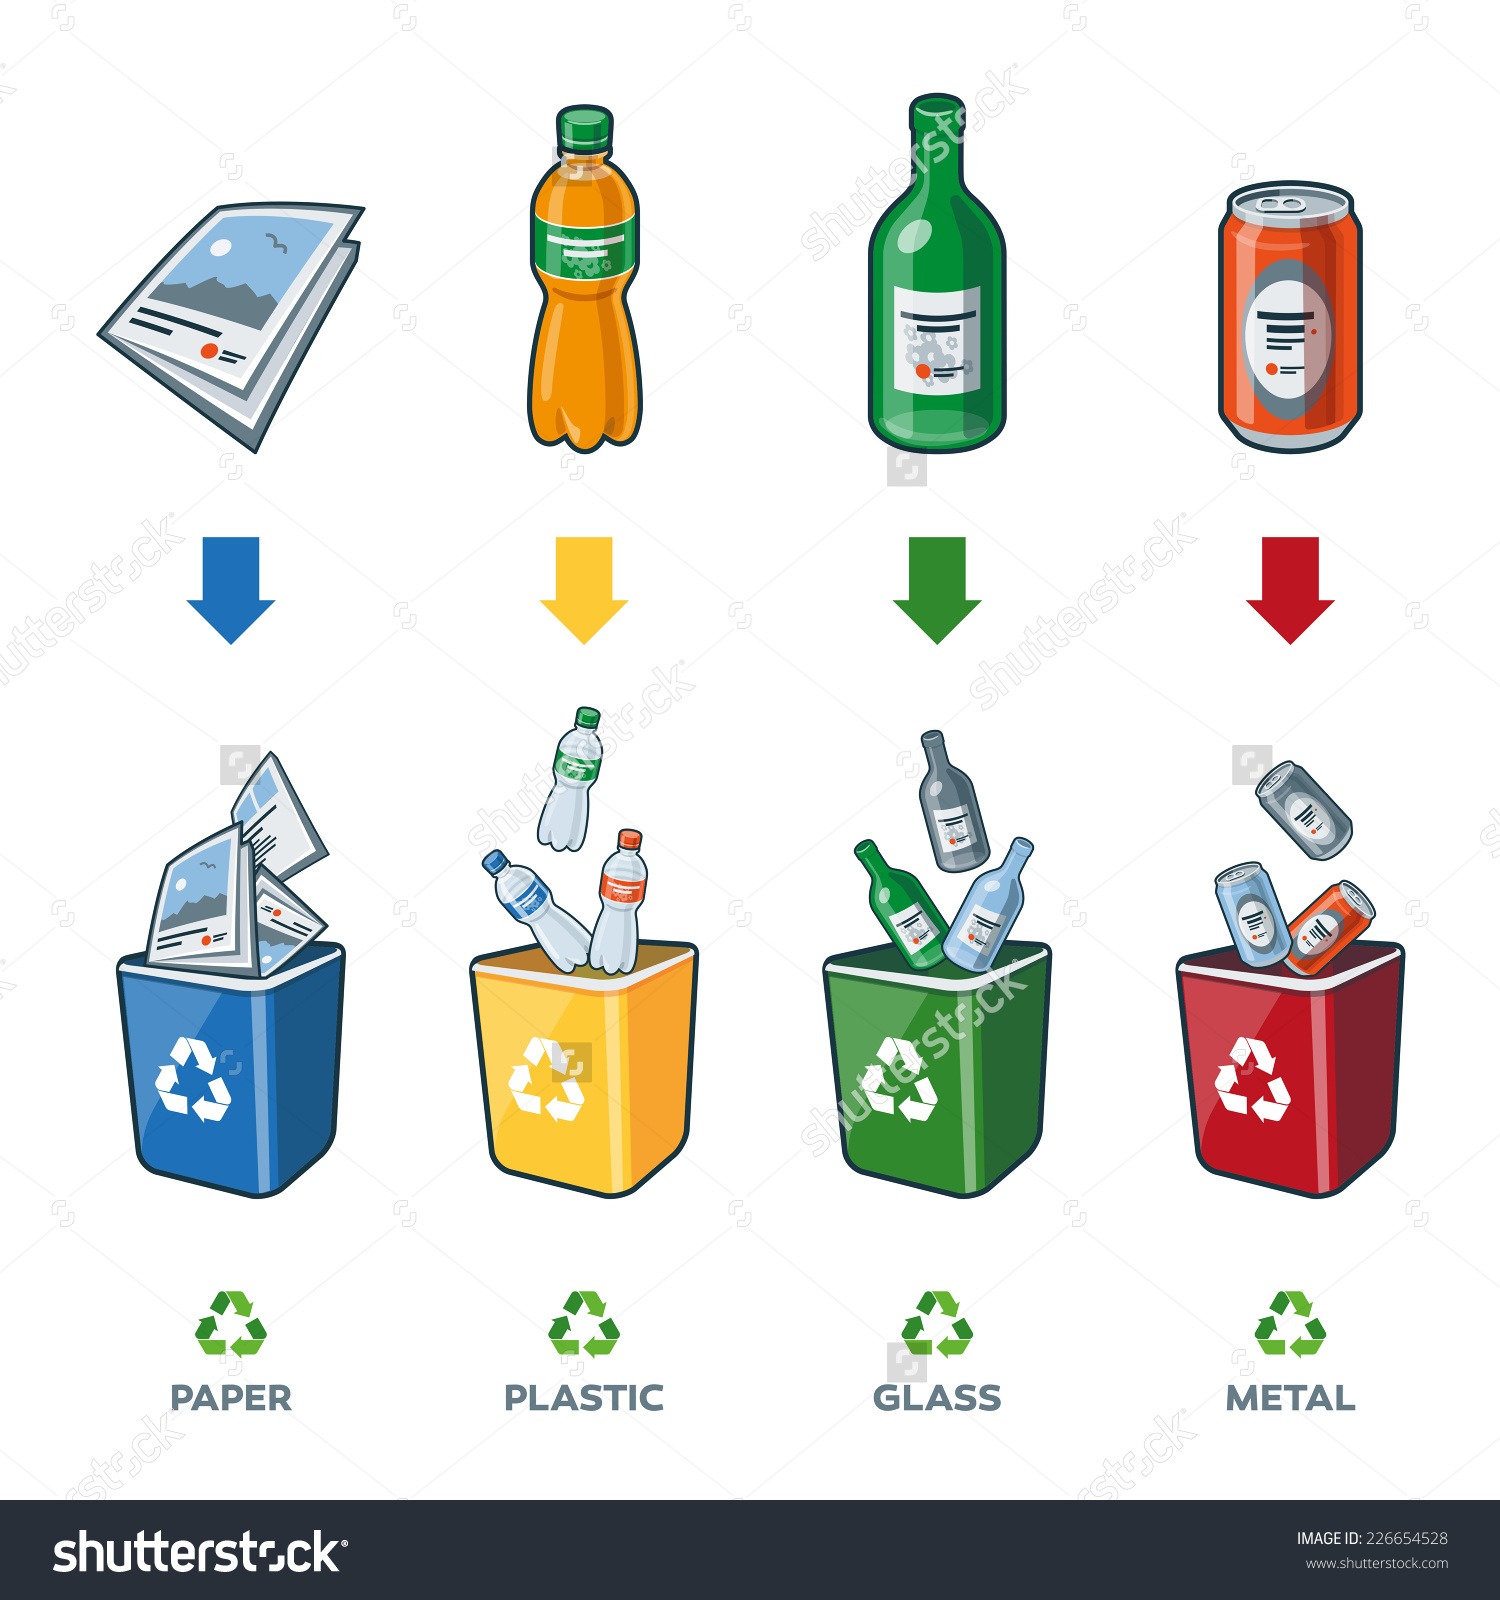 Benefits of Waste to Energy